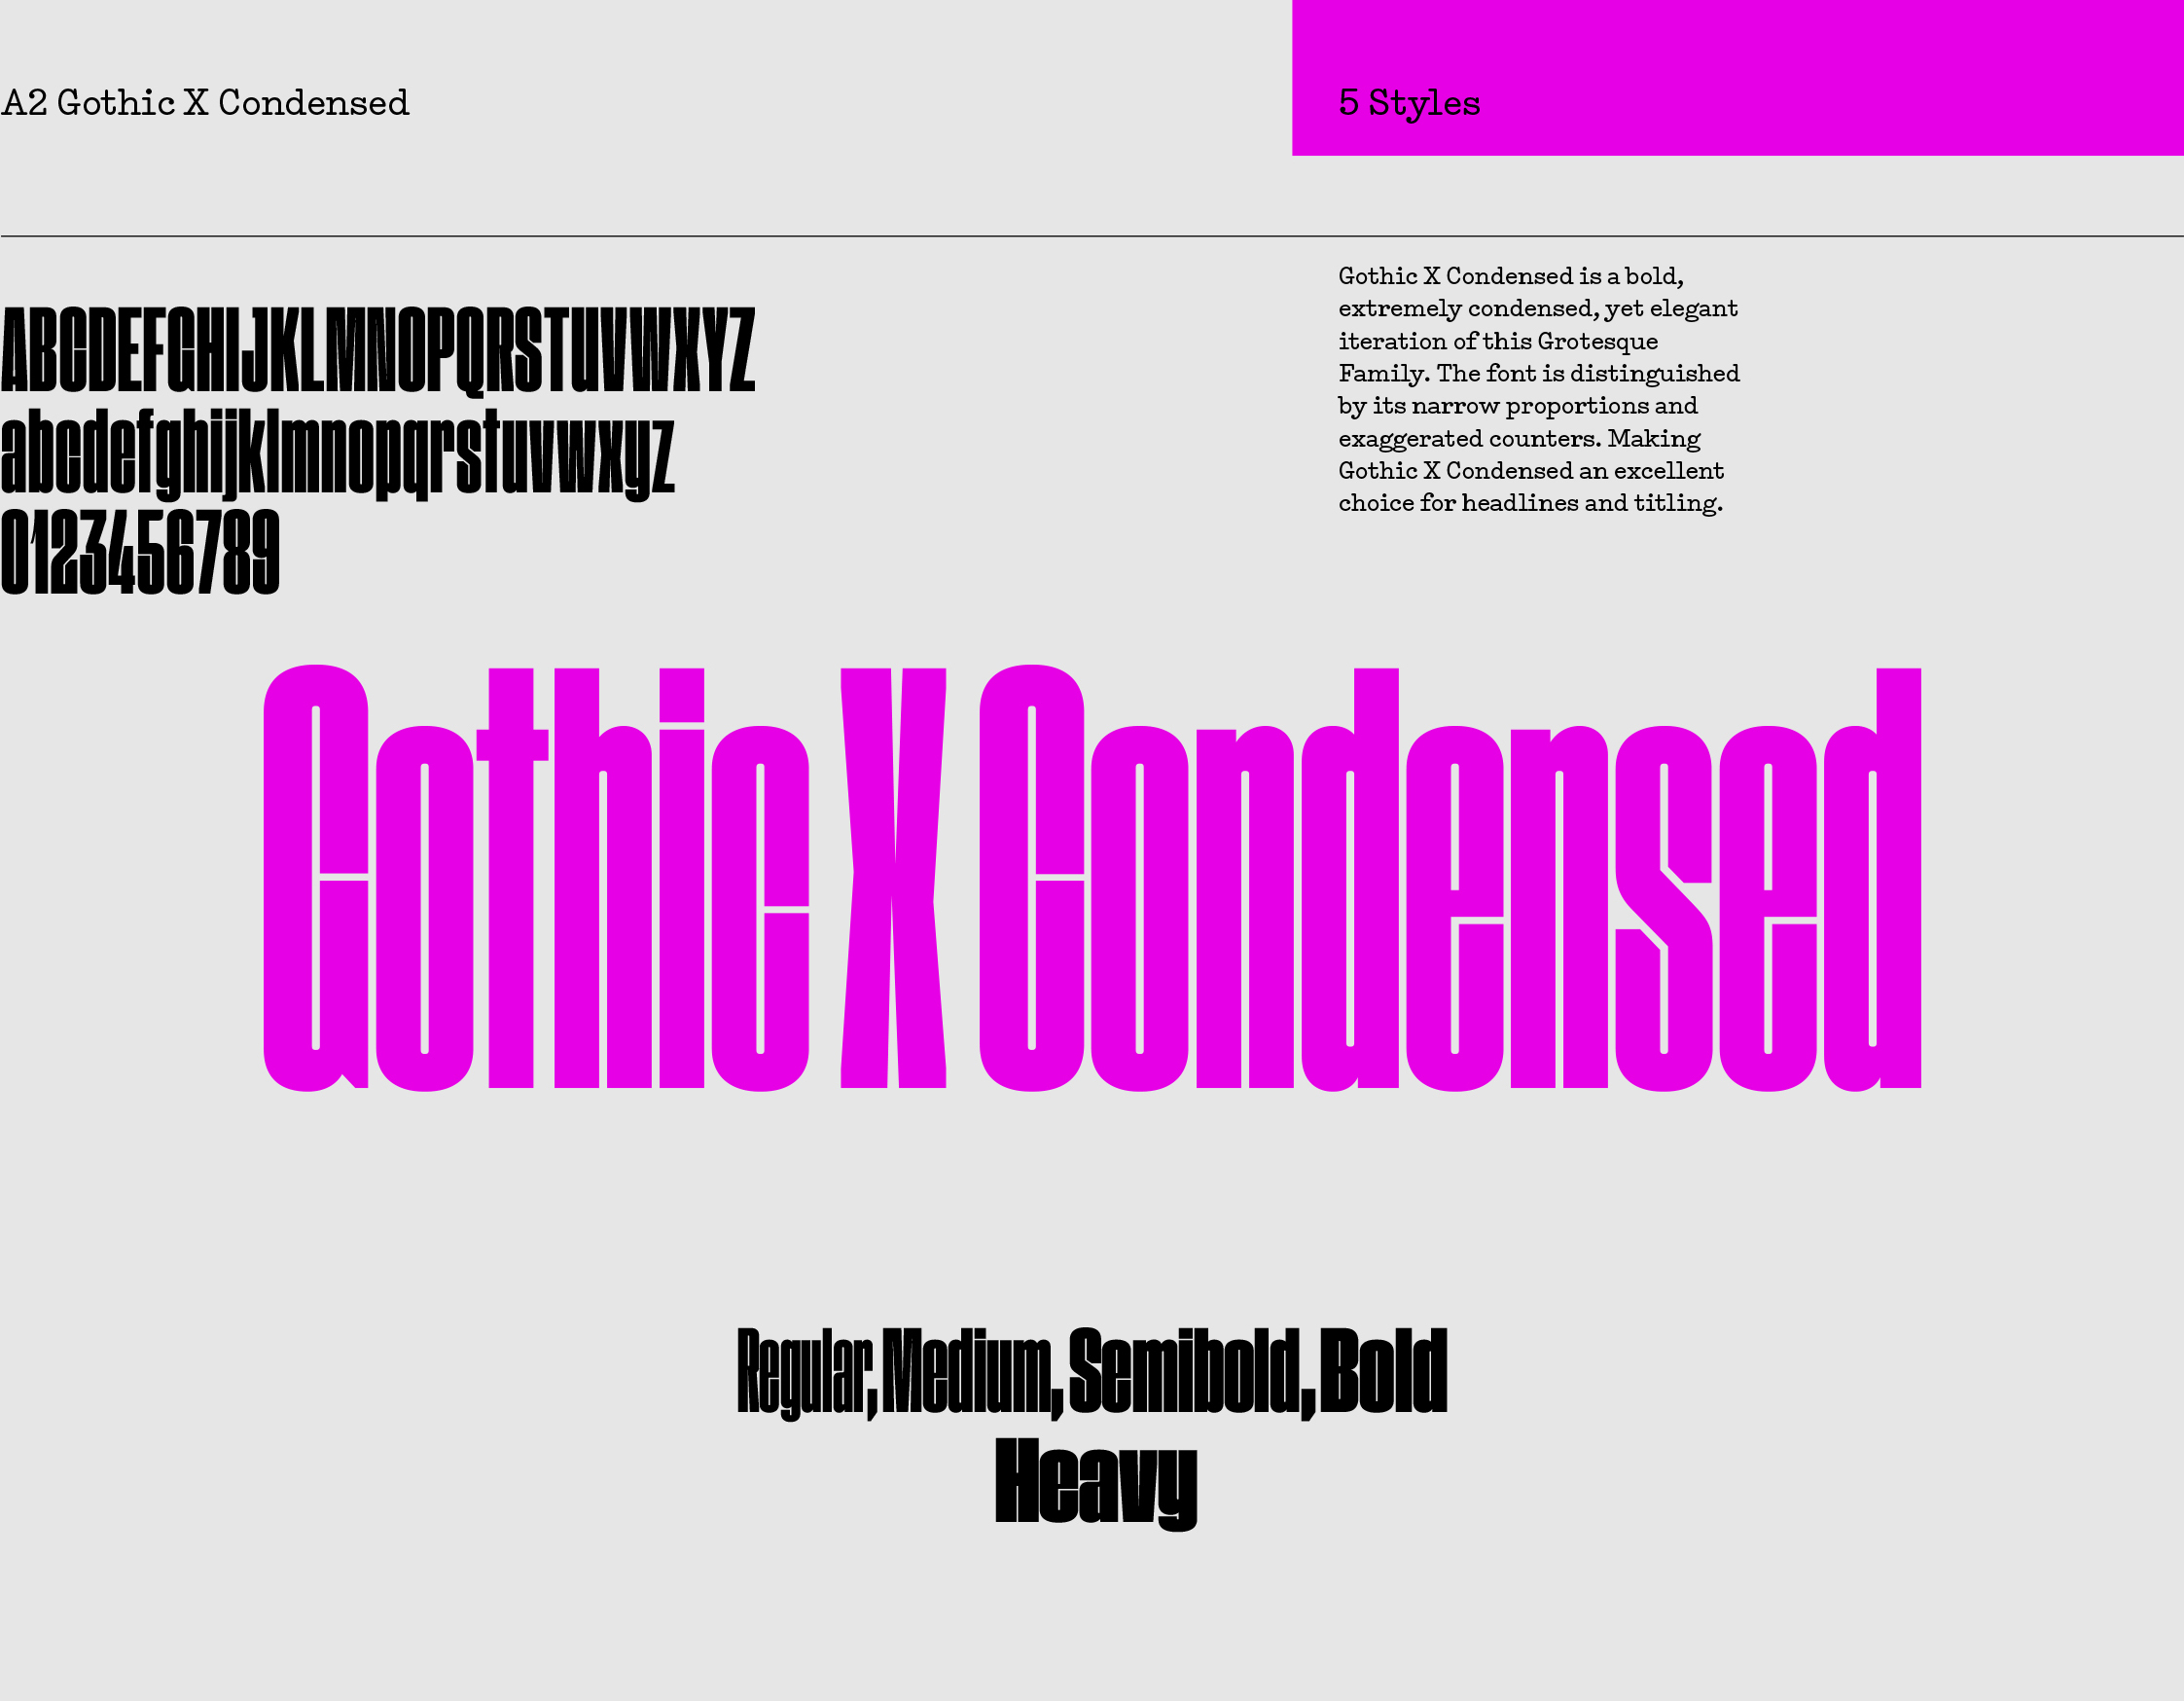 A2 Gothic X Condensed sample